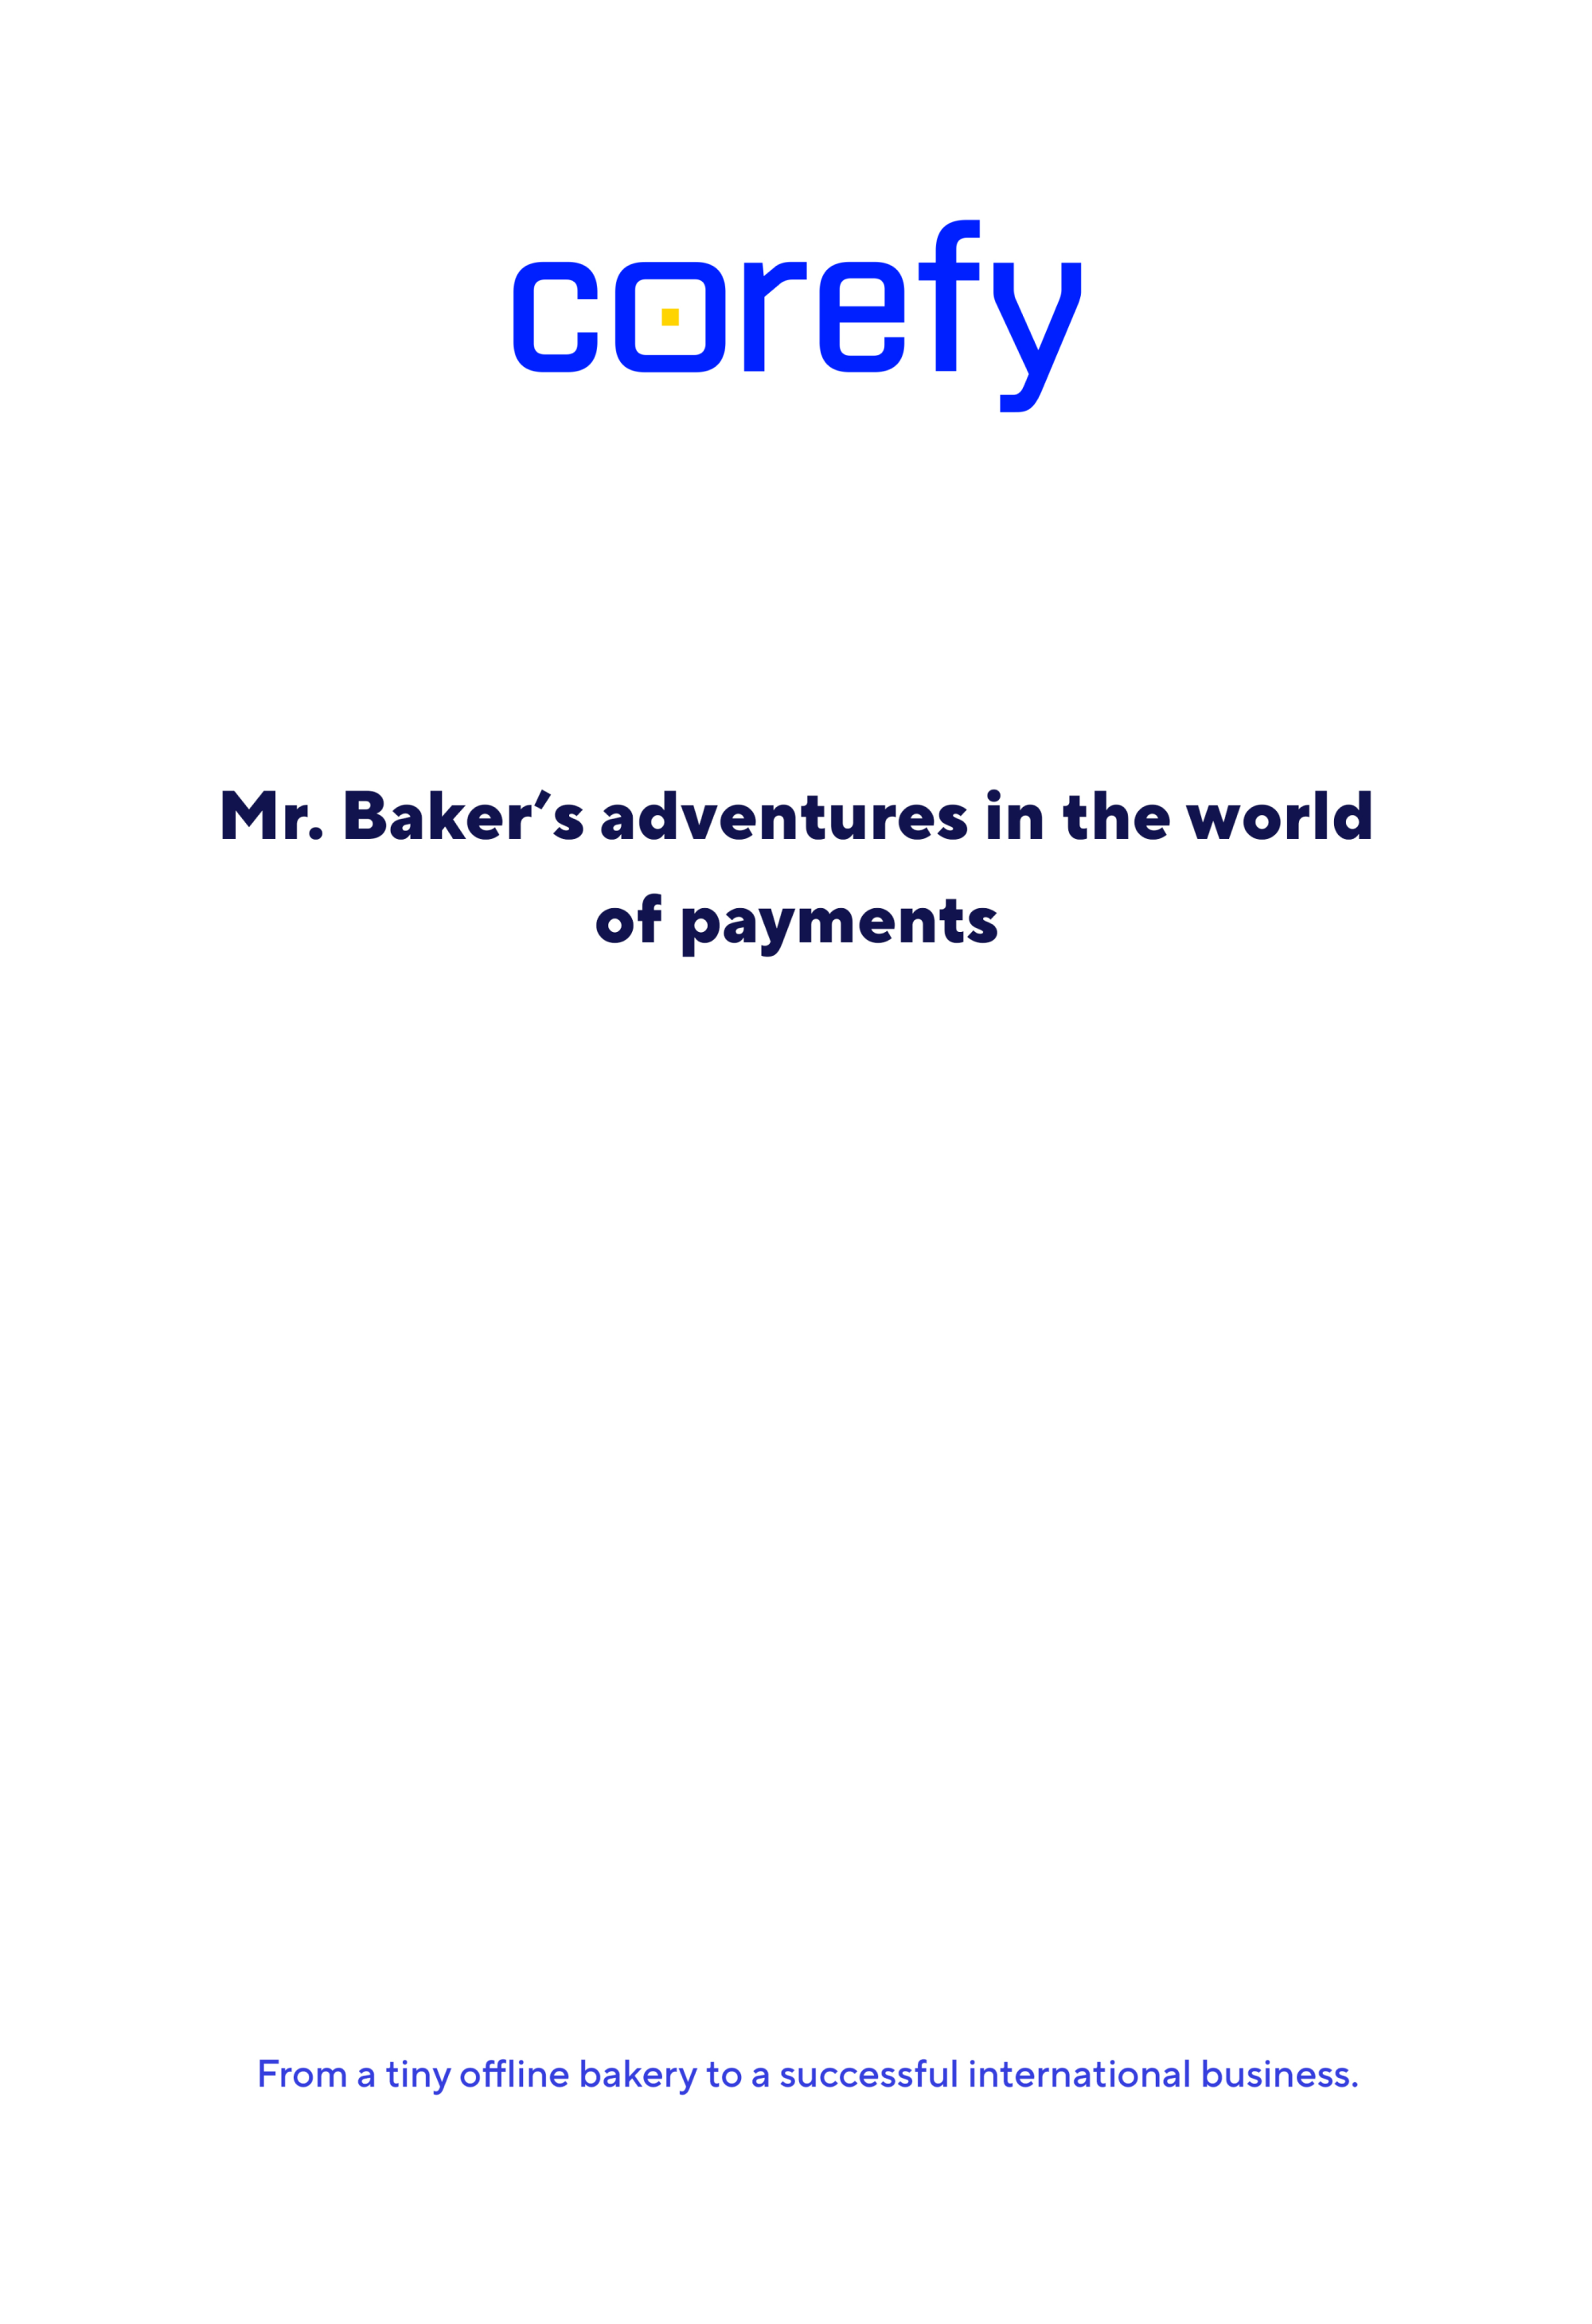 Mr. Baker's adventures in the world of payments